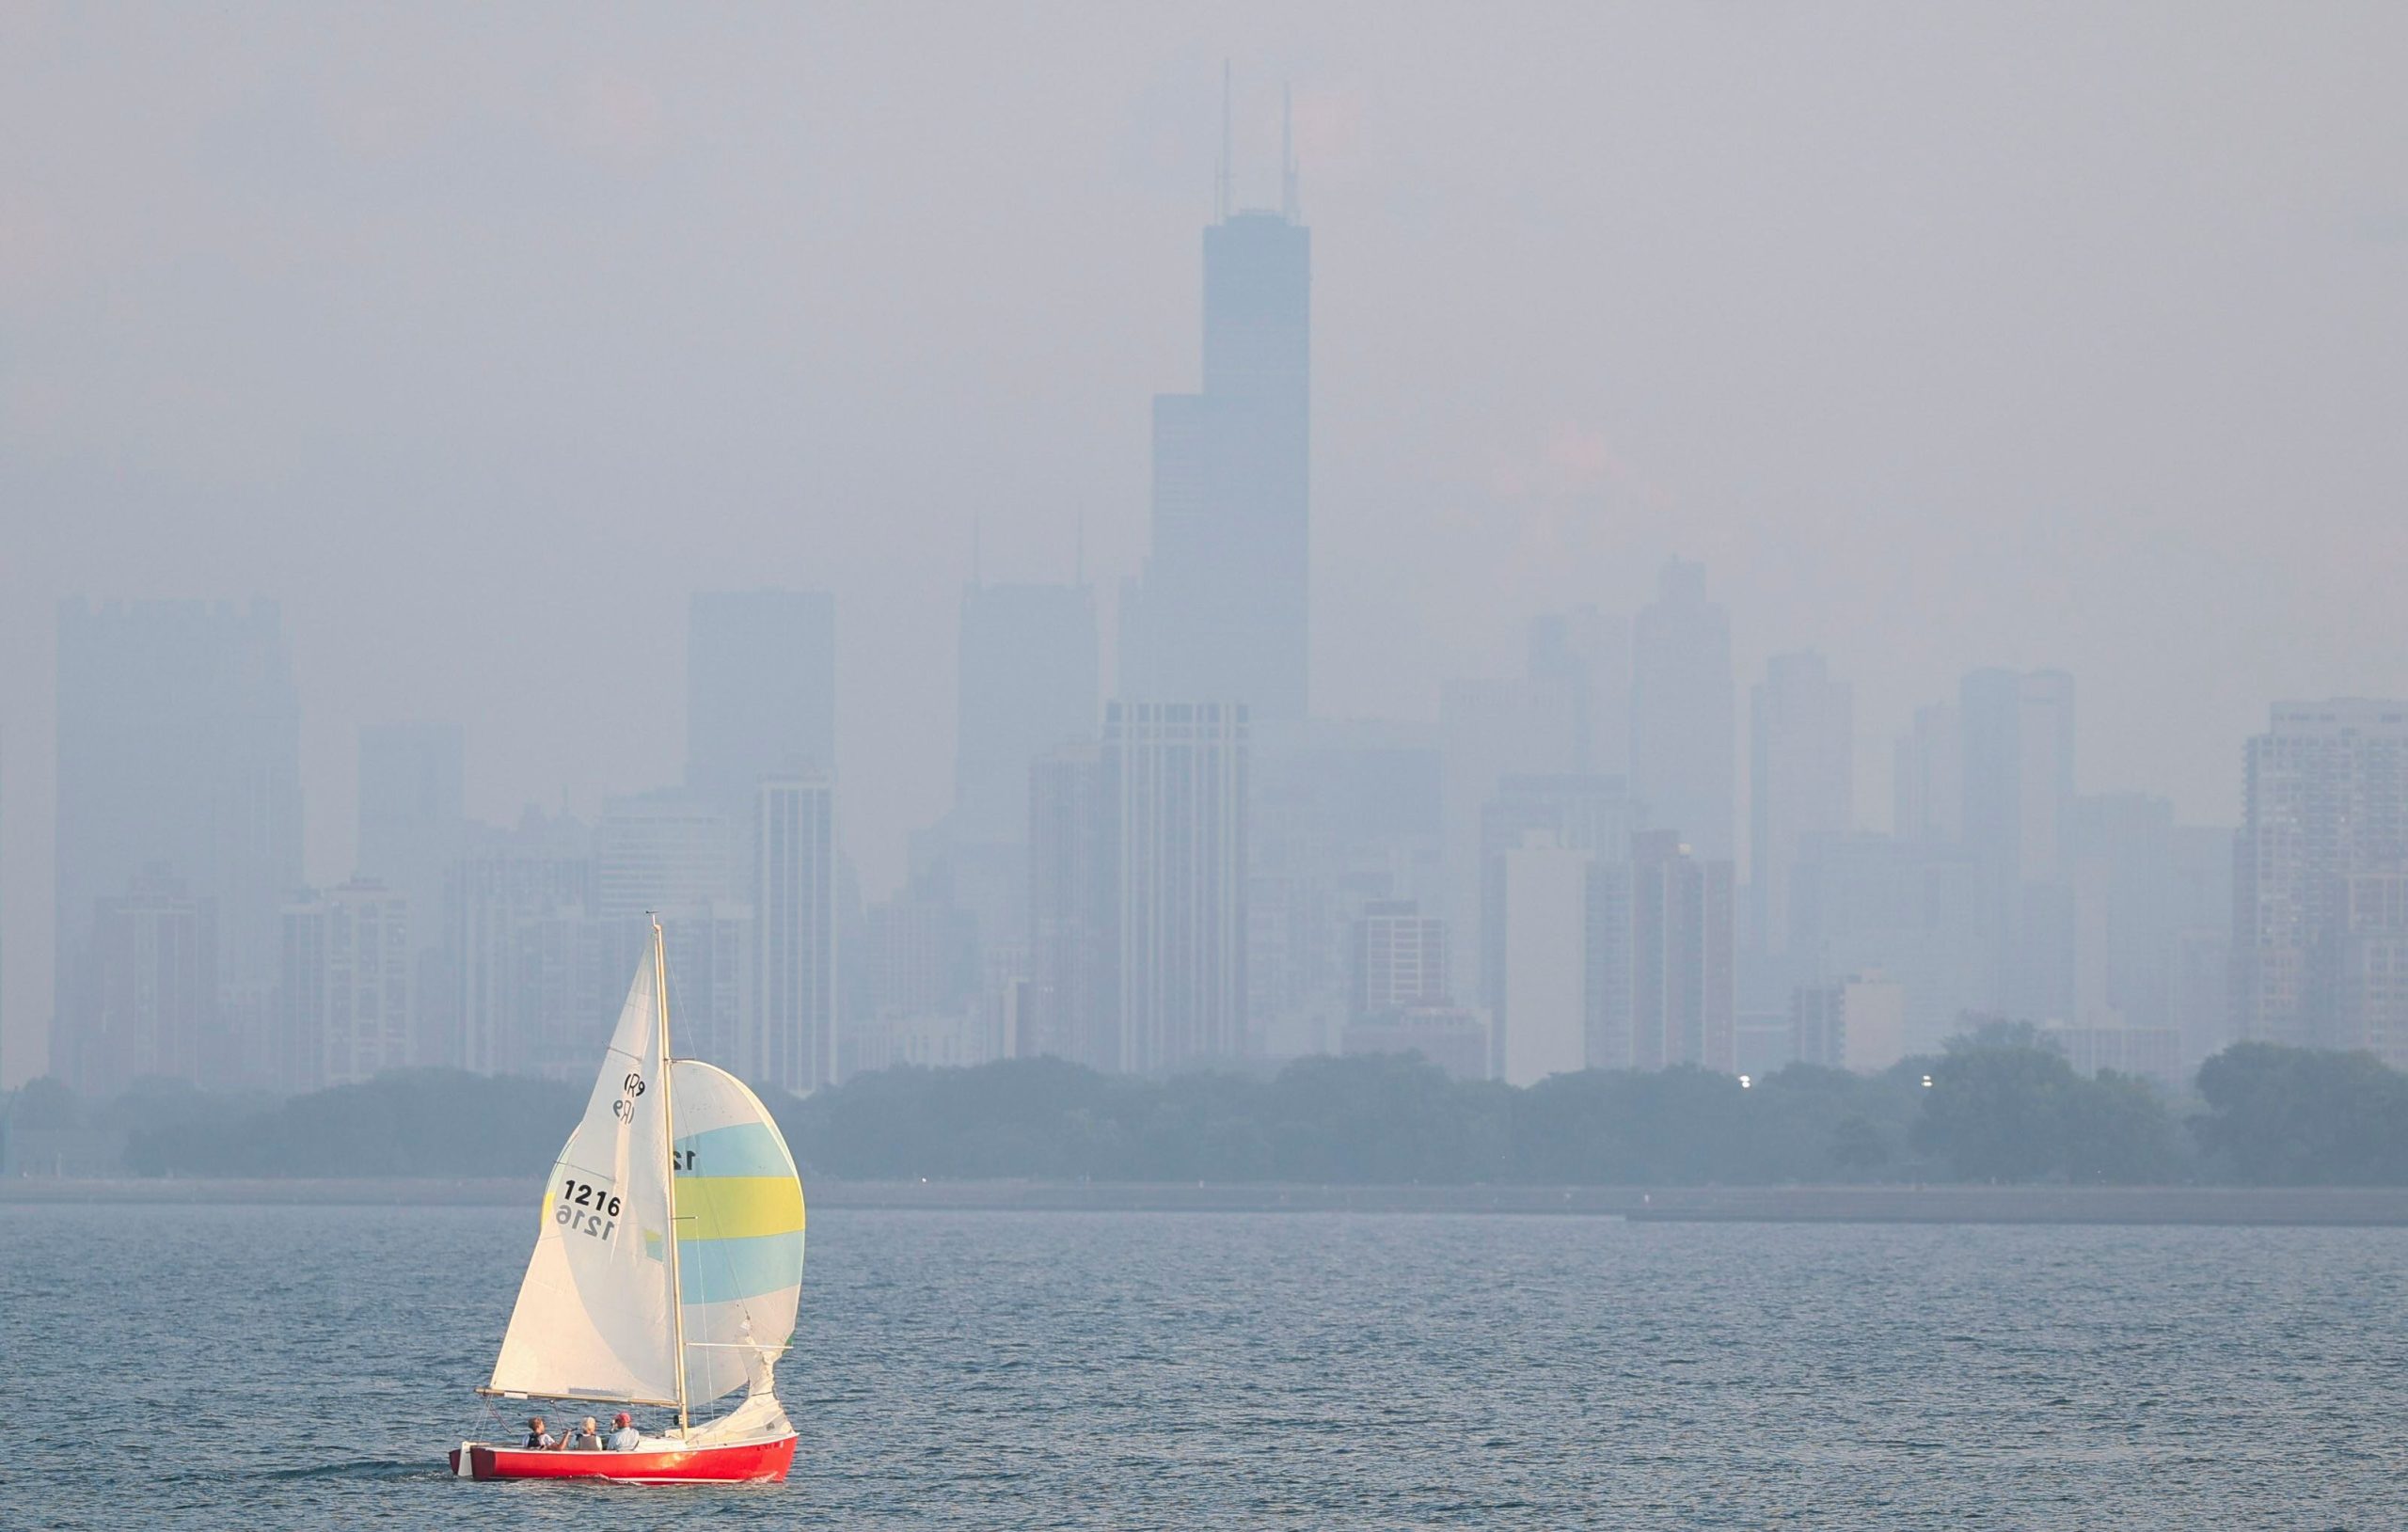 webnexttech | Can AC protect against wildfire smoke? How Chicagoans can stay safe from bad air while indoors.